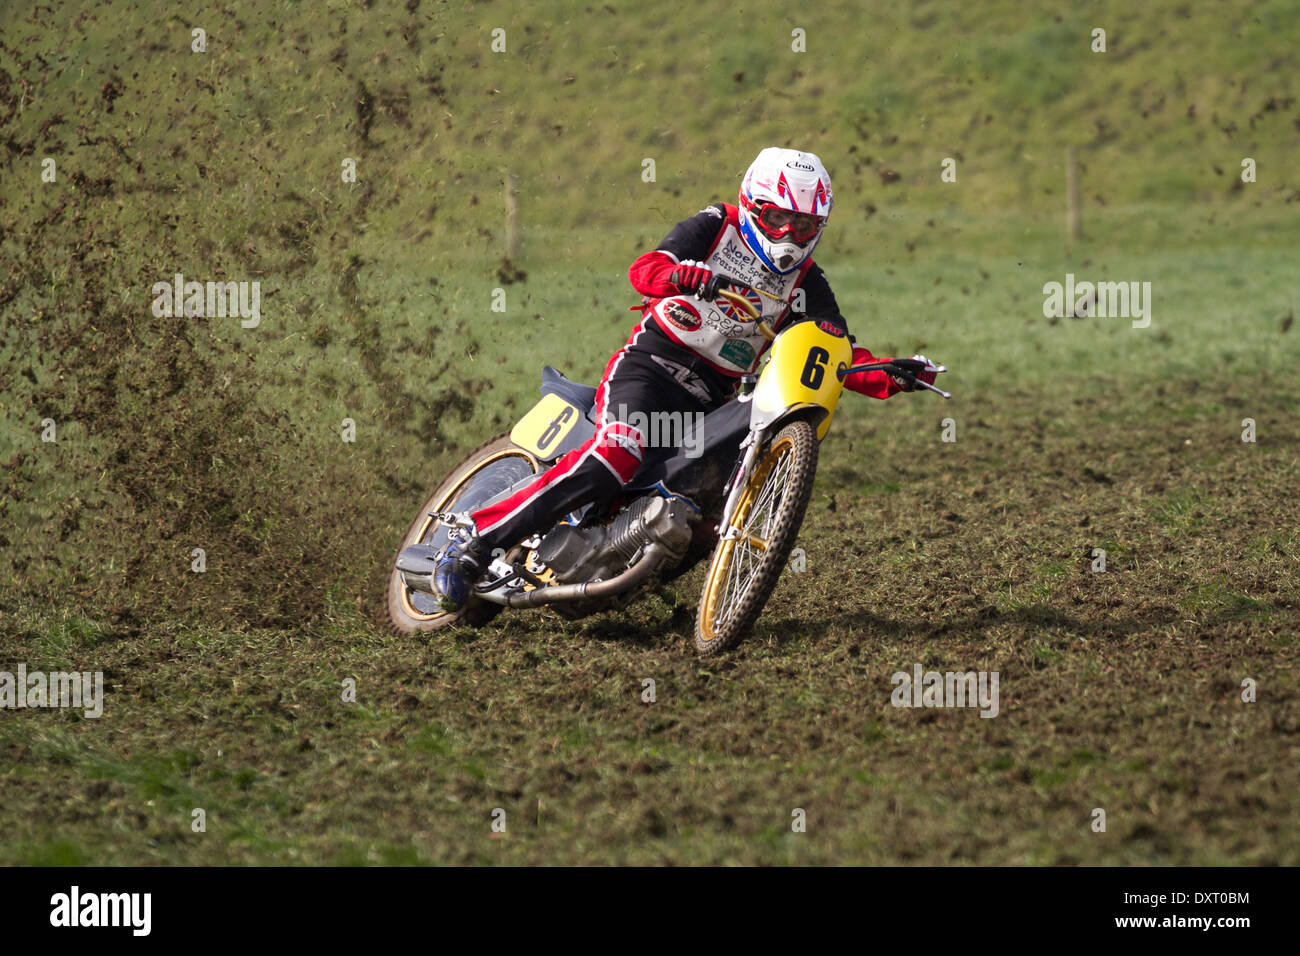 Youngsters grass track motorcycle riding in Much Hoole, Lancashire, UK 30th March, 2014. Rob Finlow No.6  MX65 racer at the first ever meeting of the Lancashire Offroad Grasstrack Association held at Lower Marsh Farm, Much Hoole, Preston. A junior motorcycle race, grass track, speed, bike, motorbike, motorsport, power, winner, racing, motocross, competition, extreme sports, helmet, wheel, moto, sport, rider, cross, fun, jump, riding, sports, trail, dirt, fast event held under the National Sporting Code rules of the ACU standing regulations for grass tracks. Stock Photo